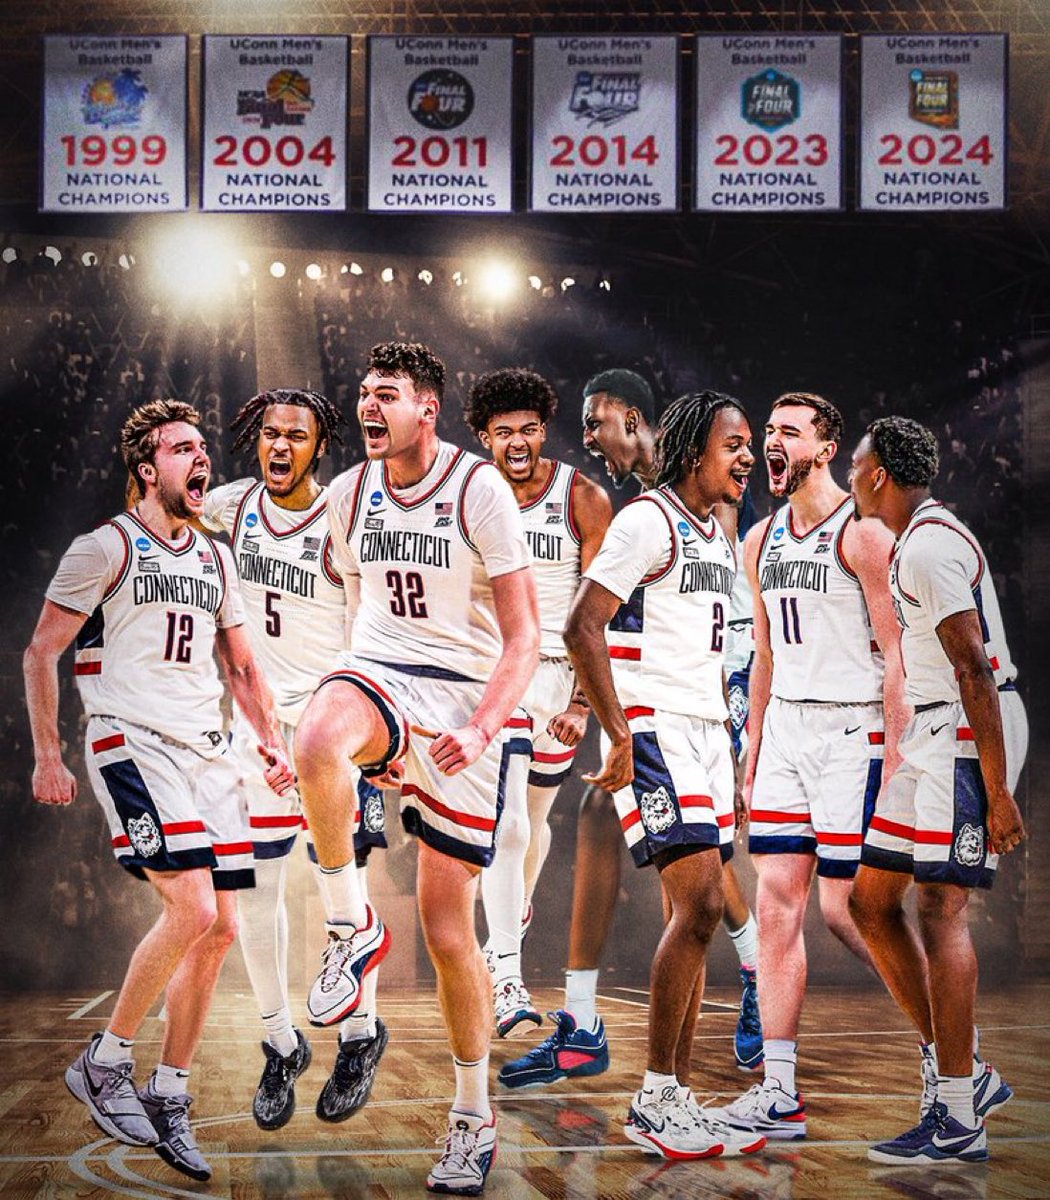 The UConn Huskies go BACK-TO-BACK FOR THE 2024 NATIONAL CHAMPIONSHIP 🏆🏆
#NCAAMarchMadness #UConn #NCAAChampionship